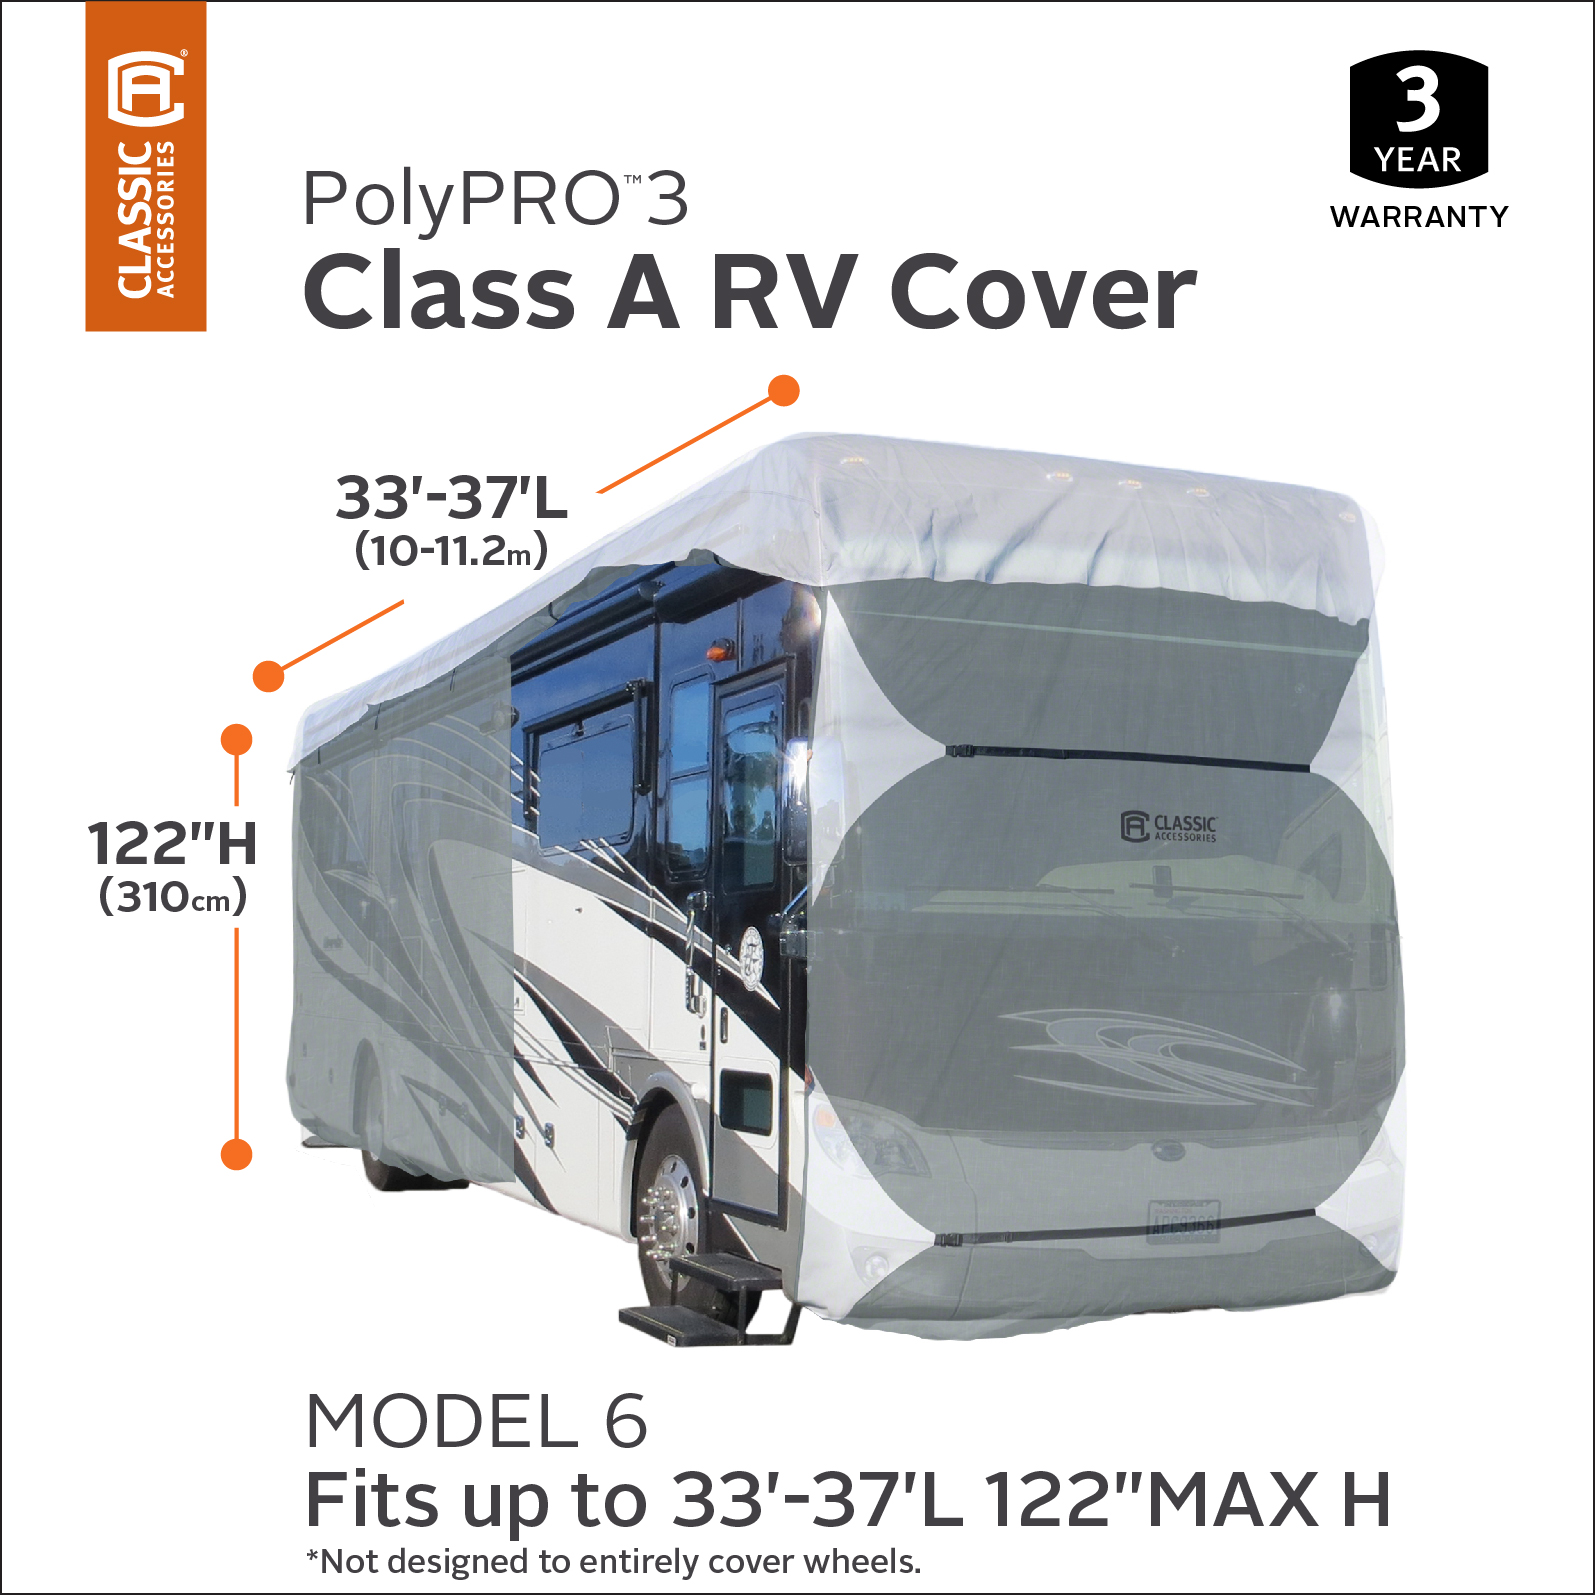 Classic Accessories OverDrive PolyPRO 3 Deluxe Class A RV Cover, Fits 33' - 37' RVs - Max Weather Protection with 3-Ply Poly Fabric Roof RV Cover (Model 6) - image 3 of 7